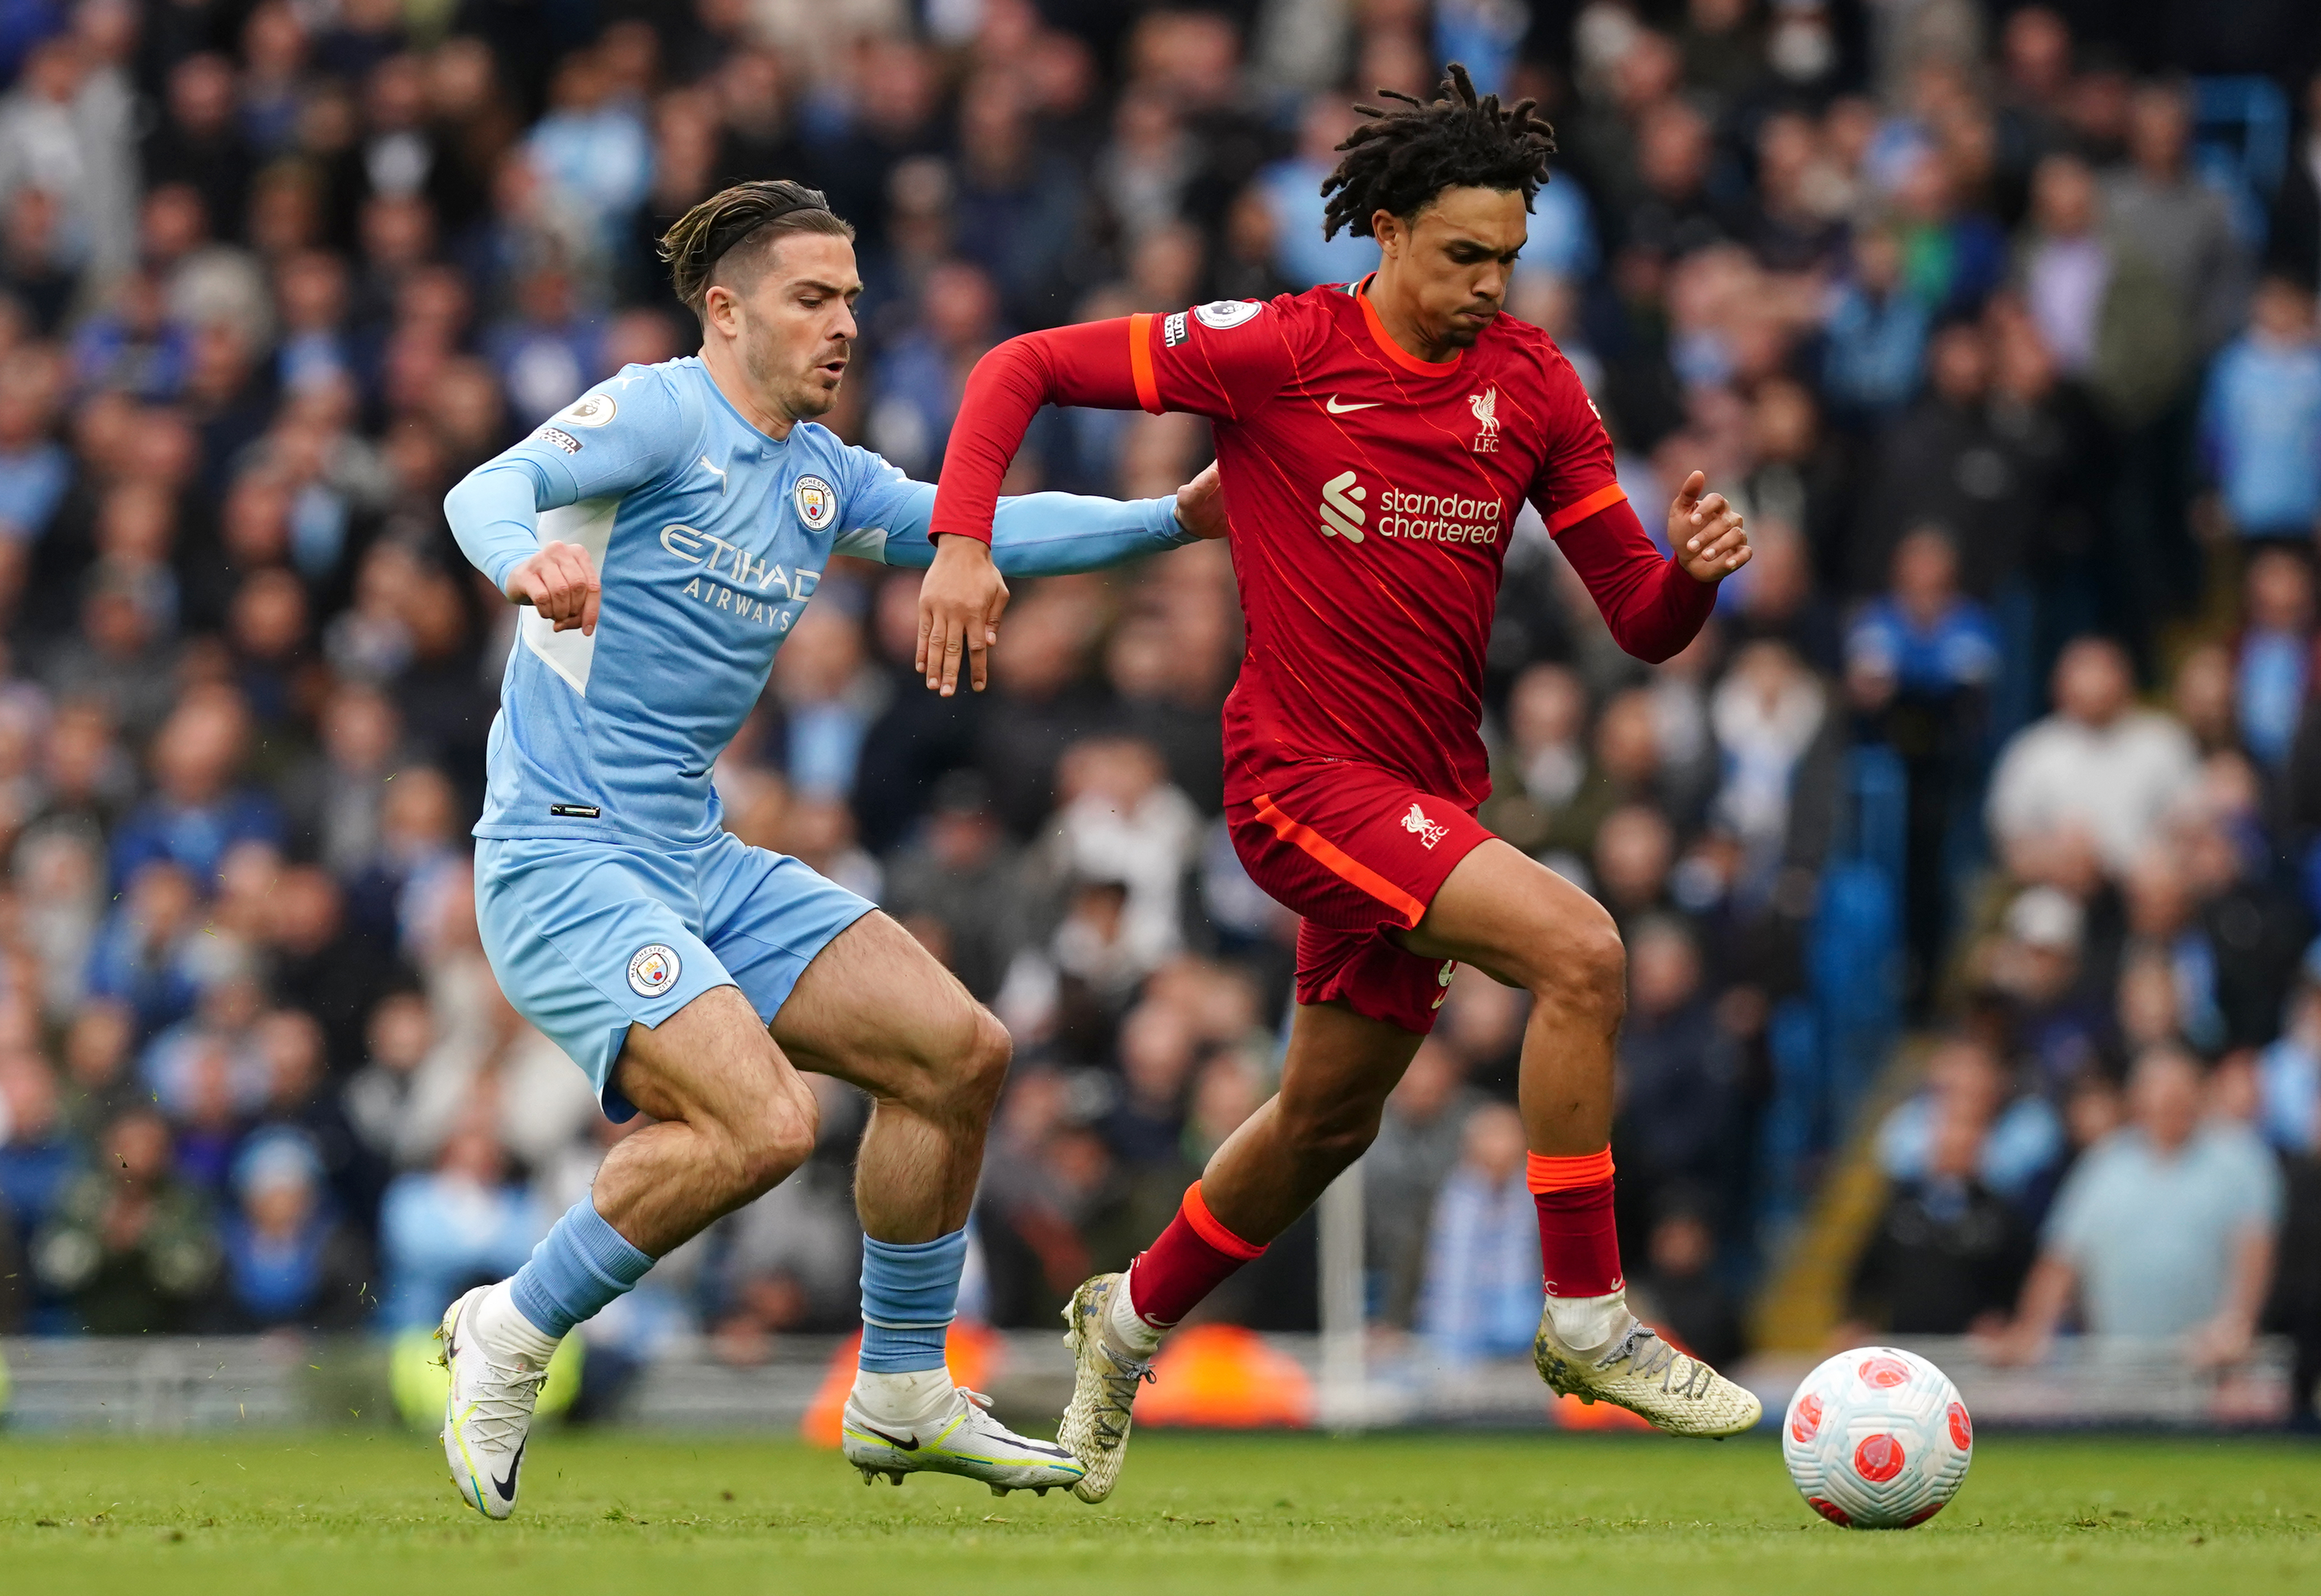 Manchester City’s Jack Grealish (left) and Liverpool’s Trent Alexander-Arnold battle for the ball during the Premier League match at the Etihad Stadium, Manchester. Picture date: Sunday April 10, 2022